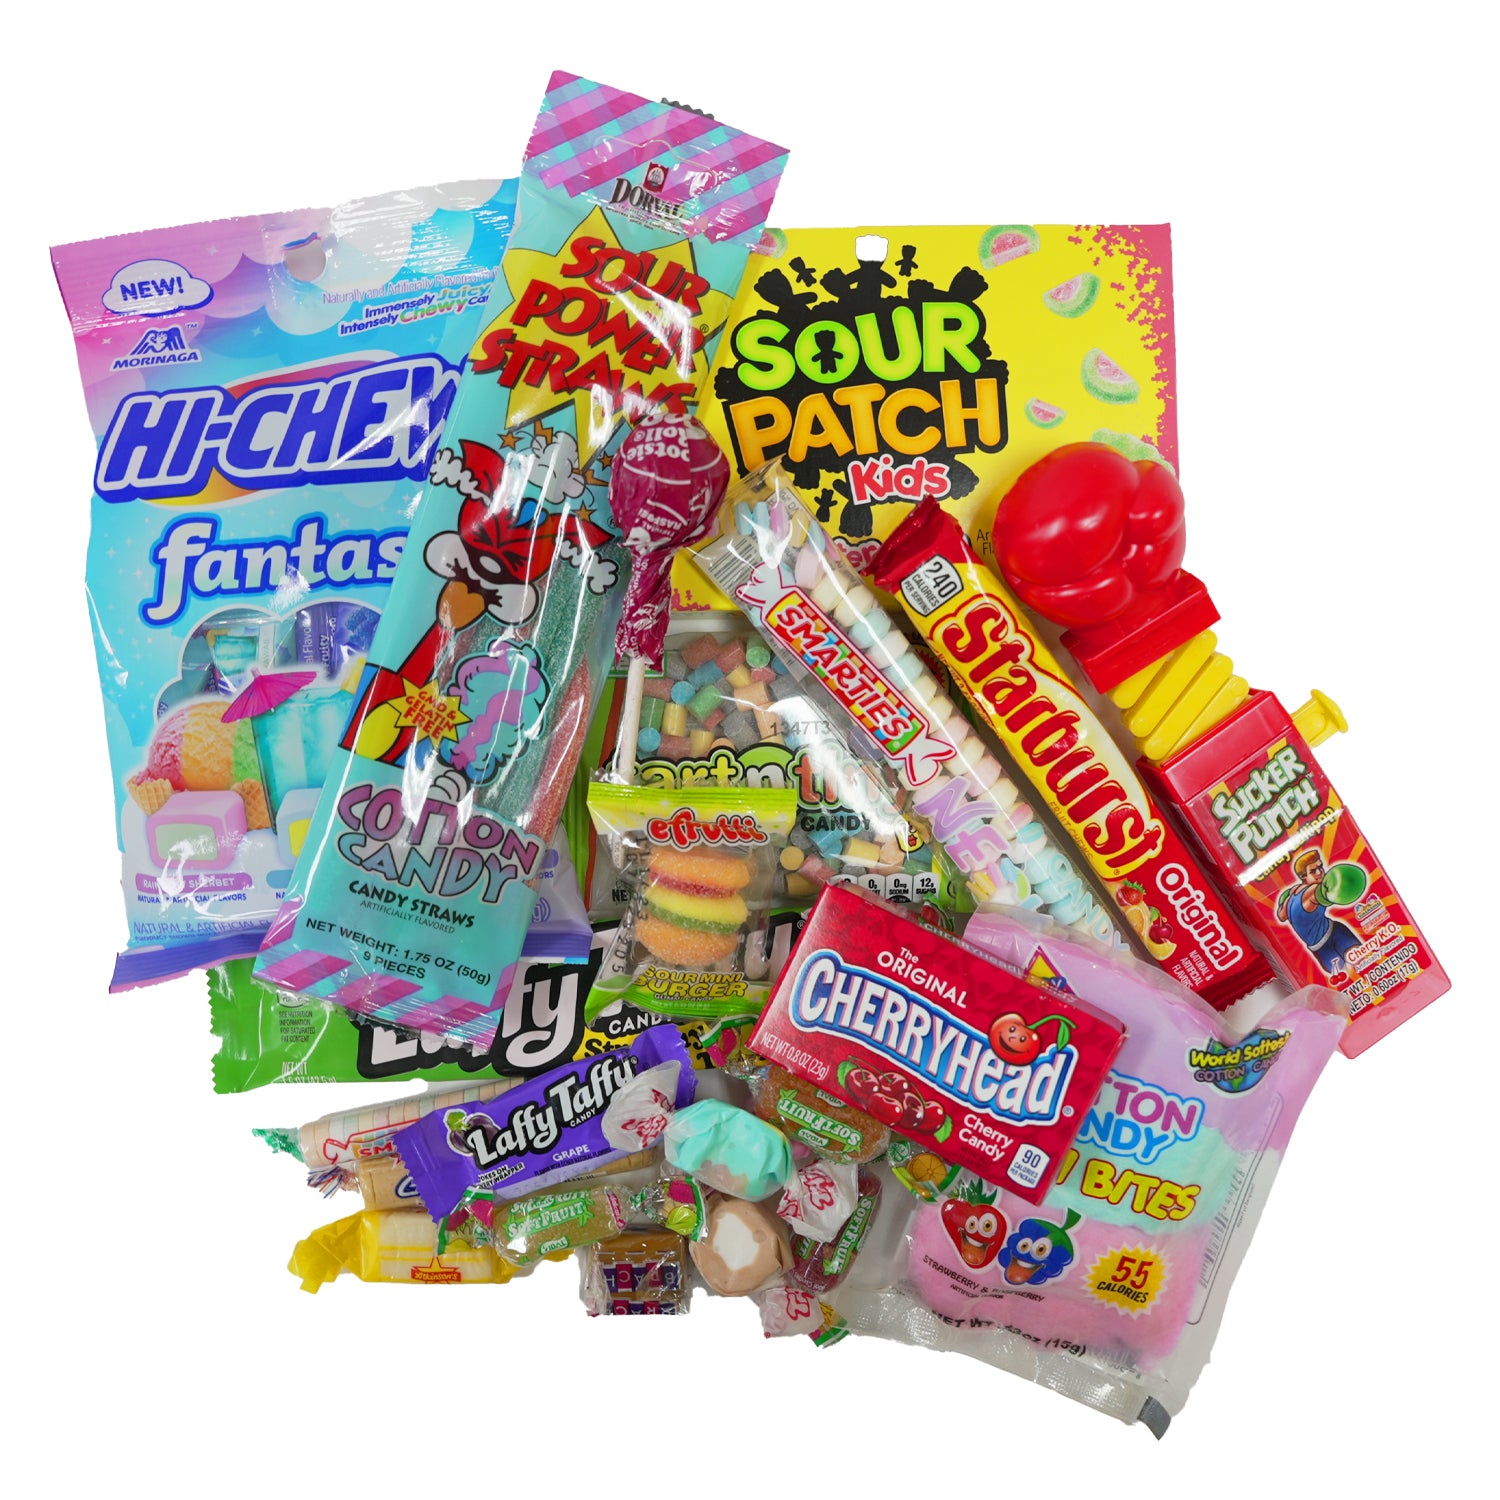 Mystery Candy Bag - All City Candy